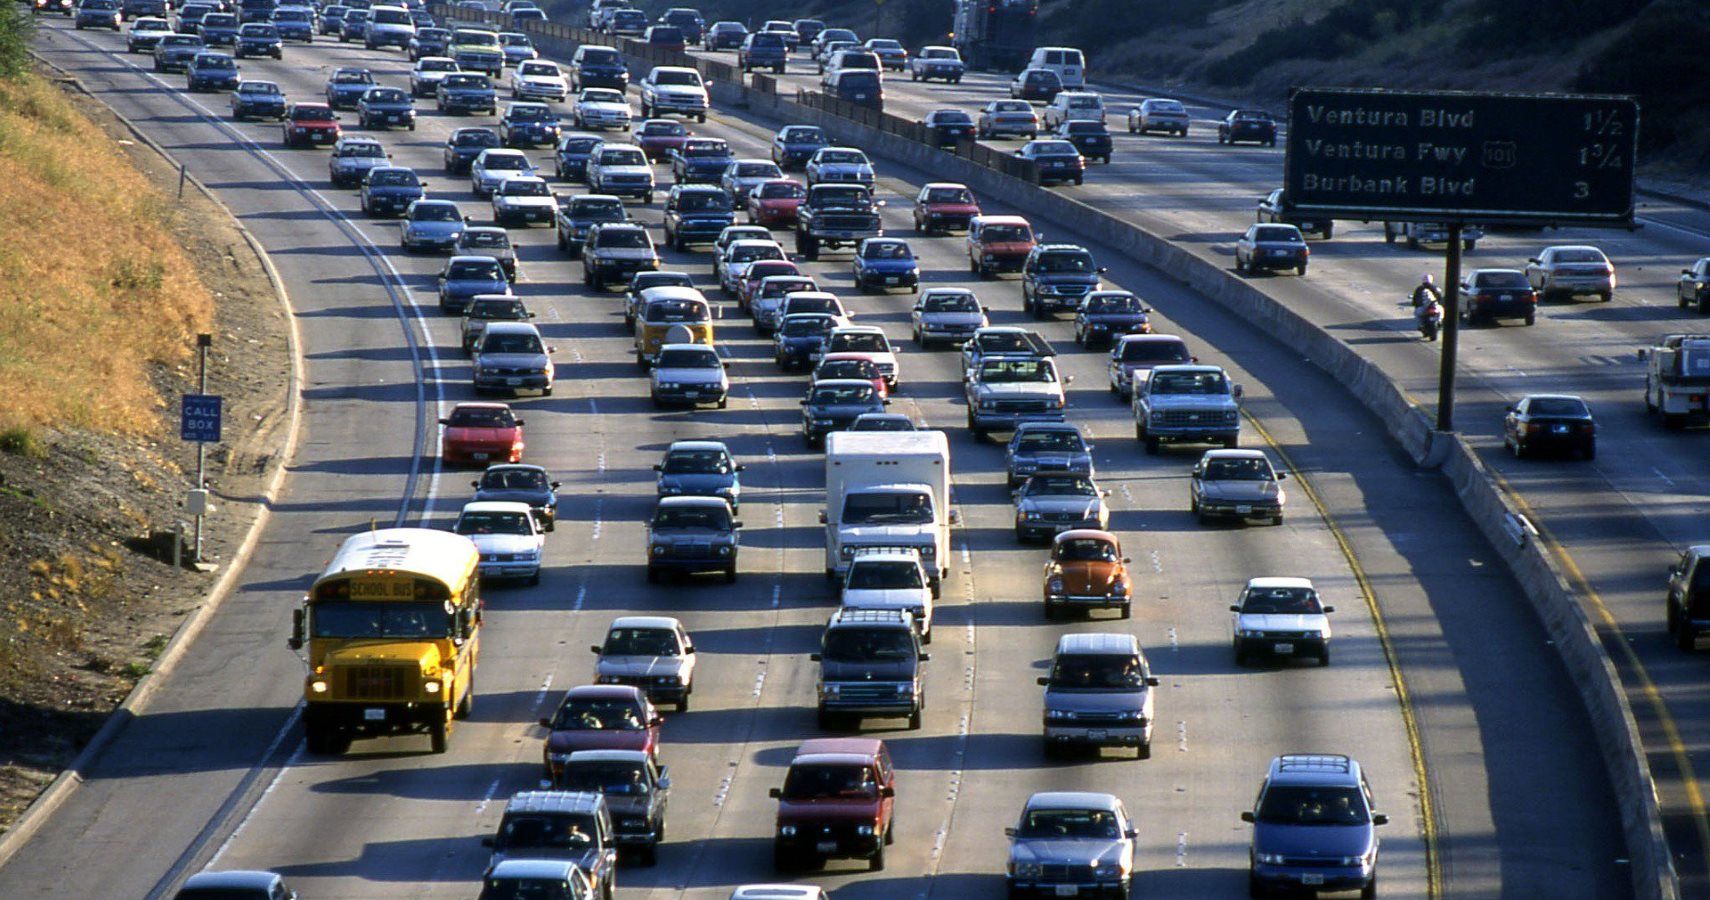 California Looking To Create Autobahn-Like Highway With No Speed Limits